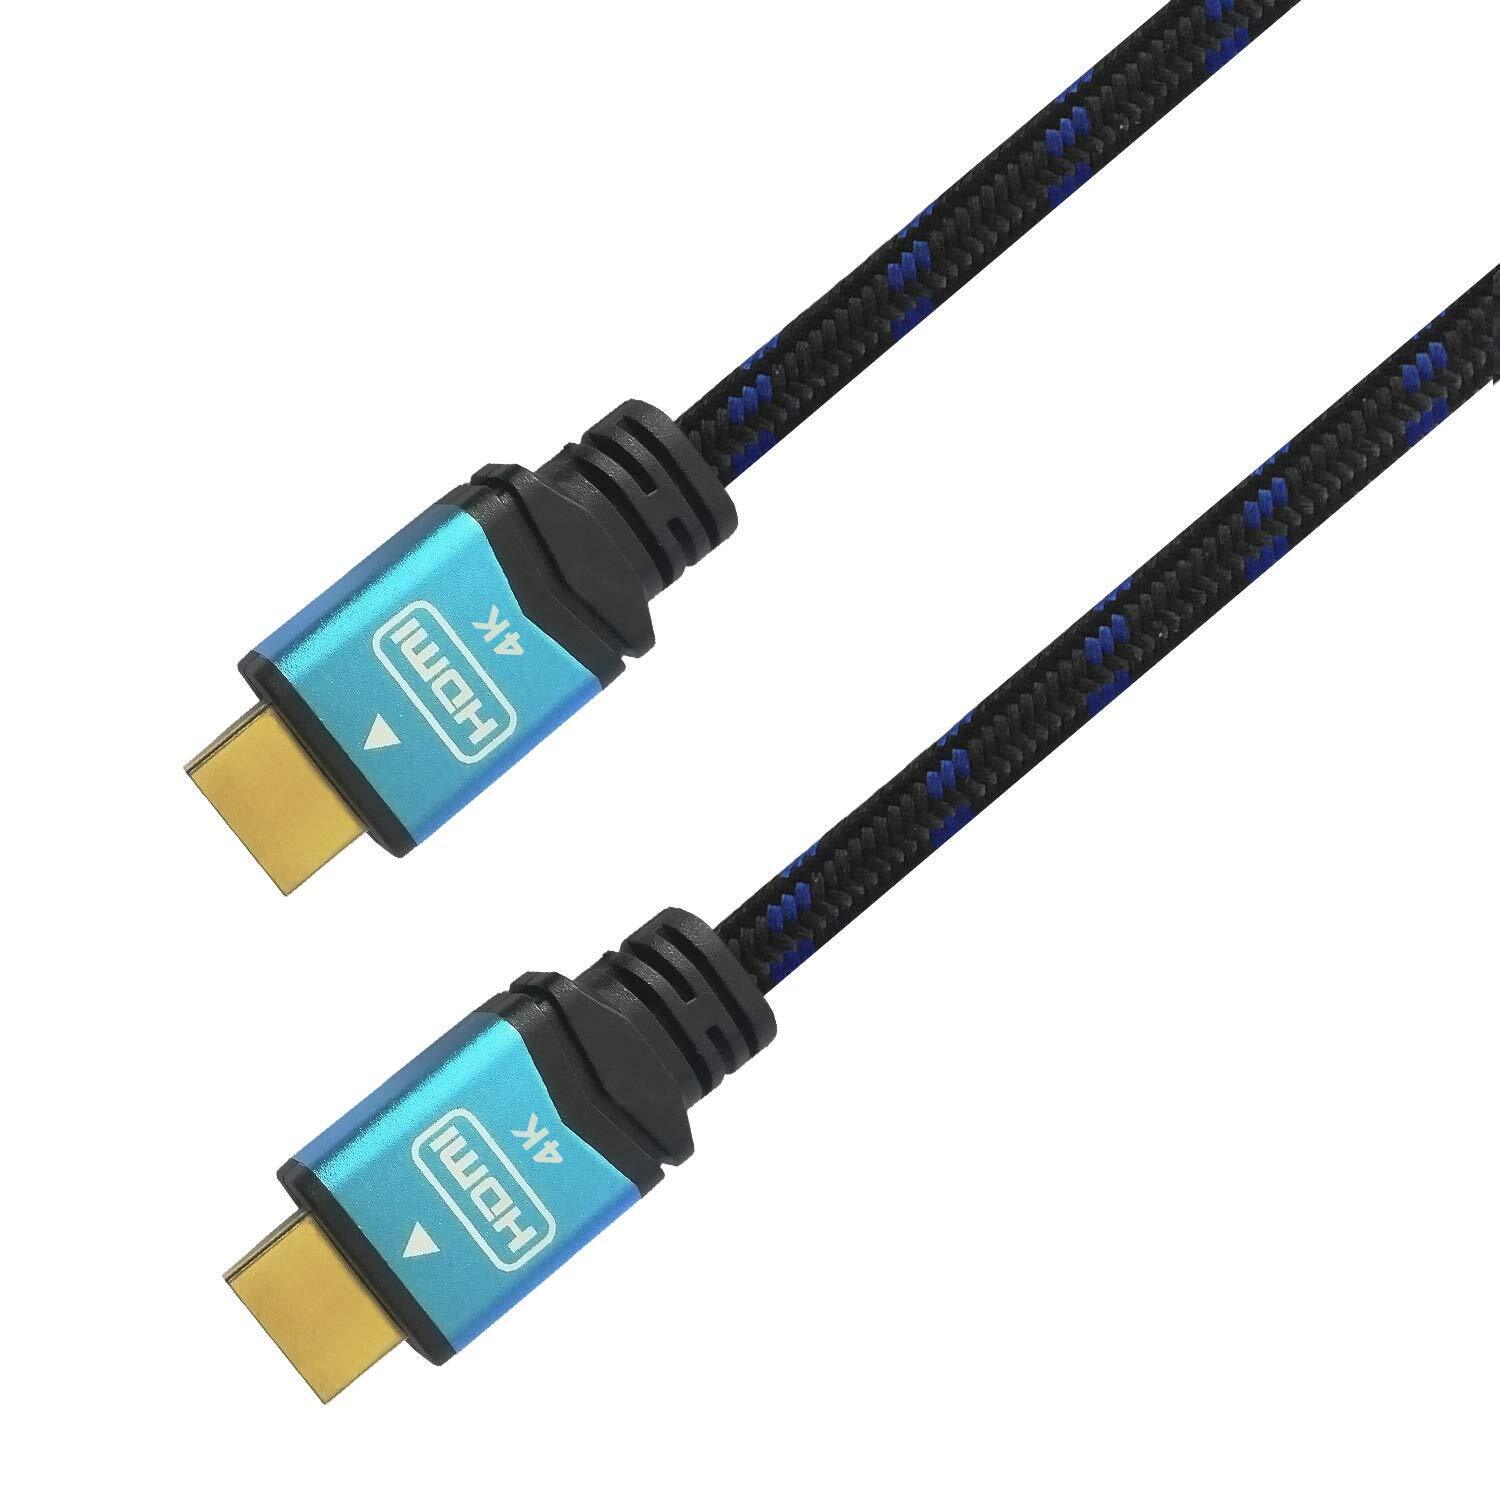 AISENS A120-0355 Premium High Speed HDMI v2.0 Cable with Ethernet 4k@60hz 18gbps